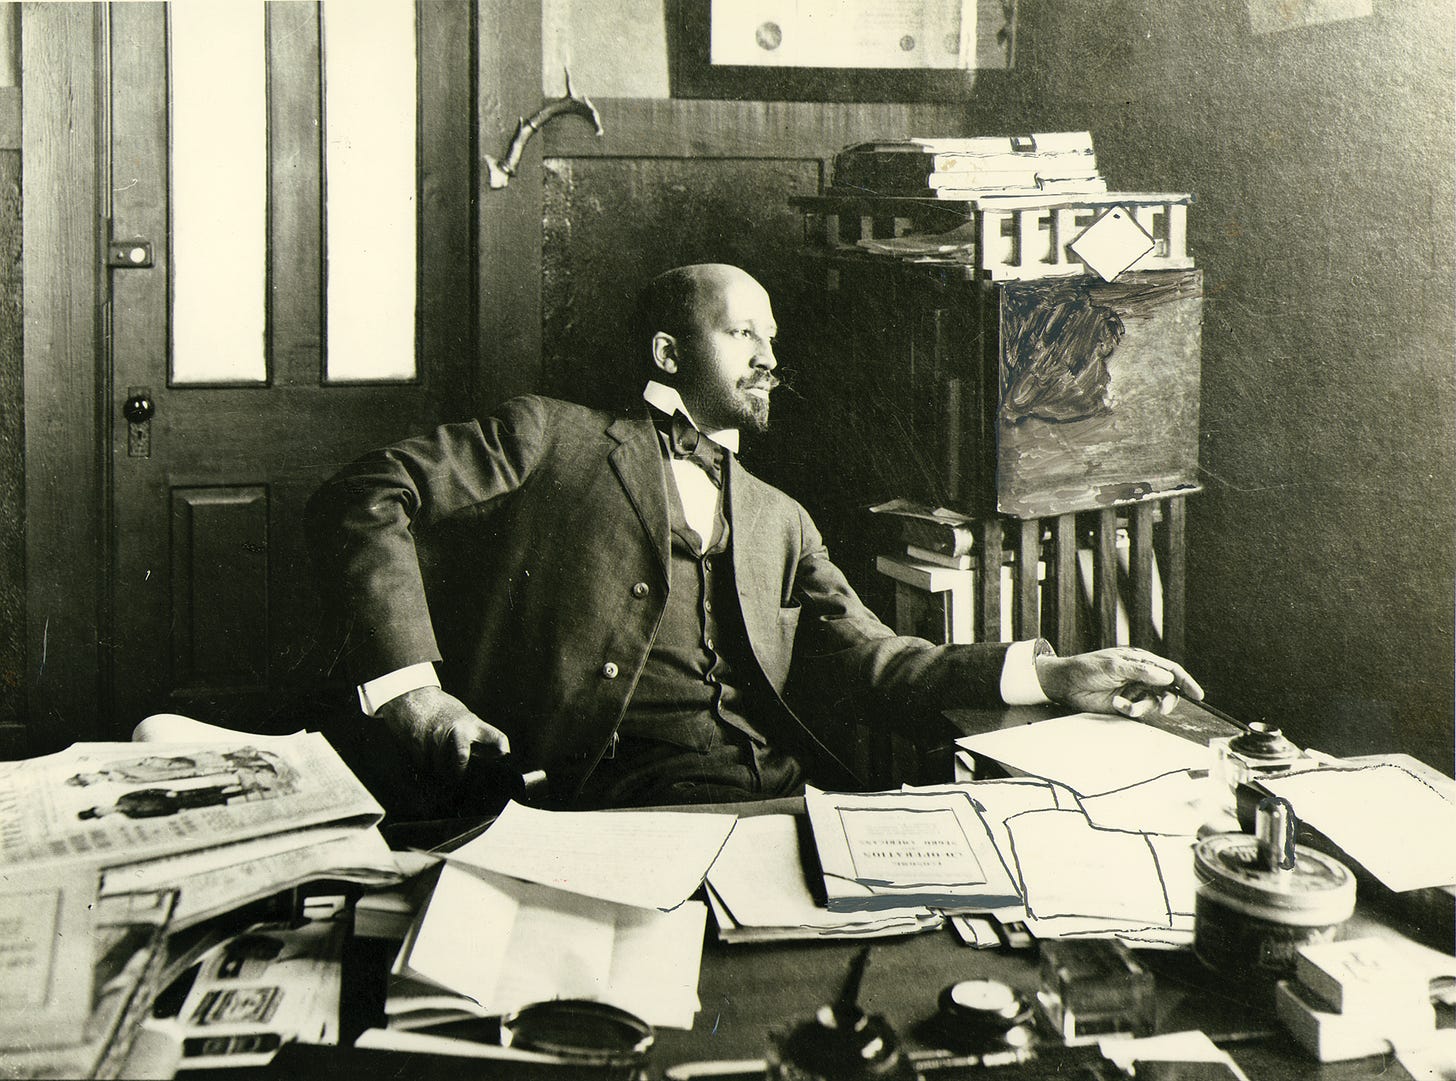 The times and life of W.E.B. Du Bois at Penn | Penn Today